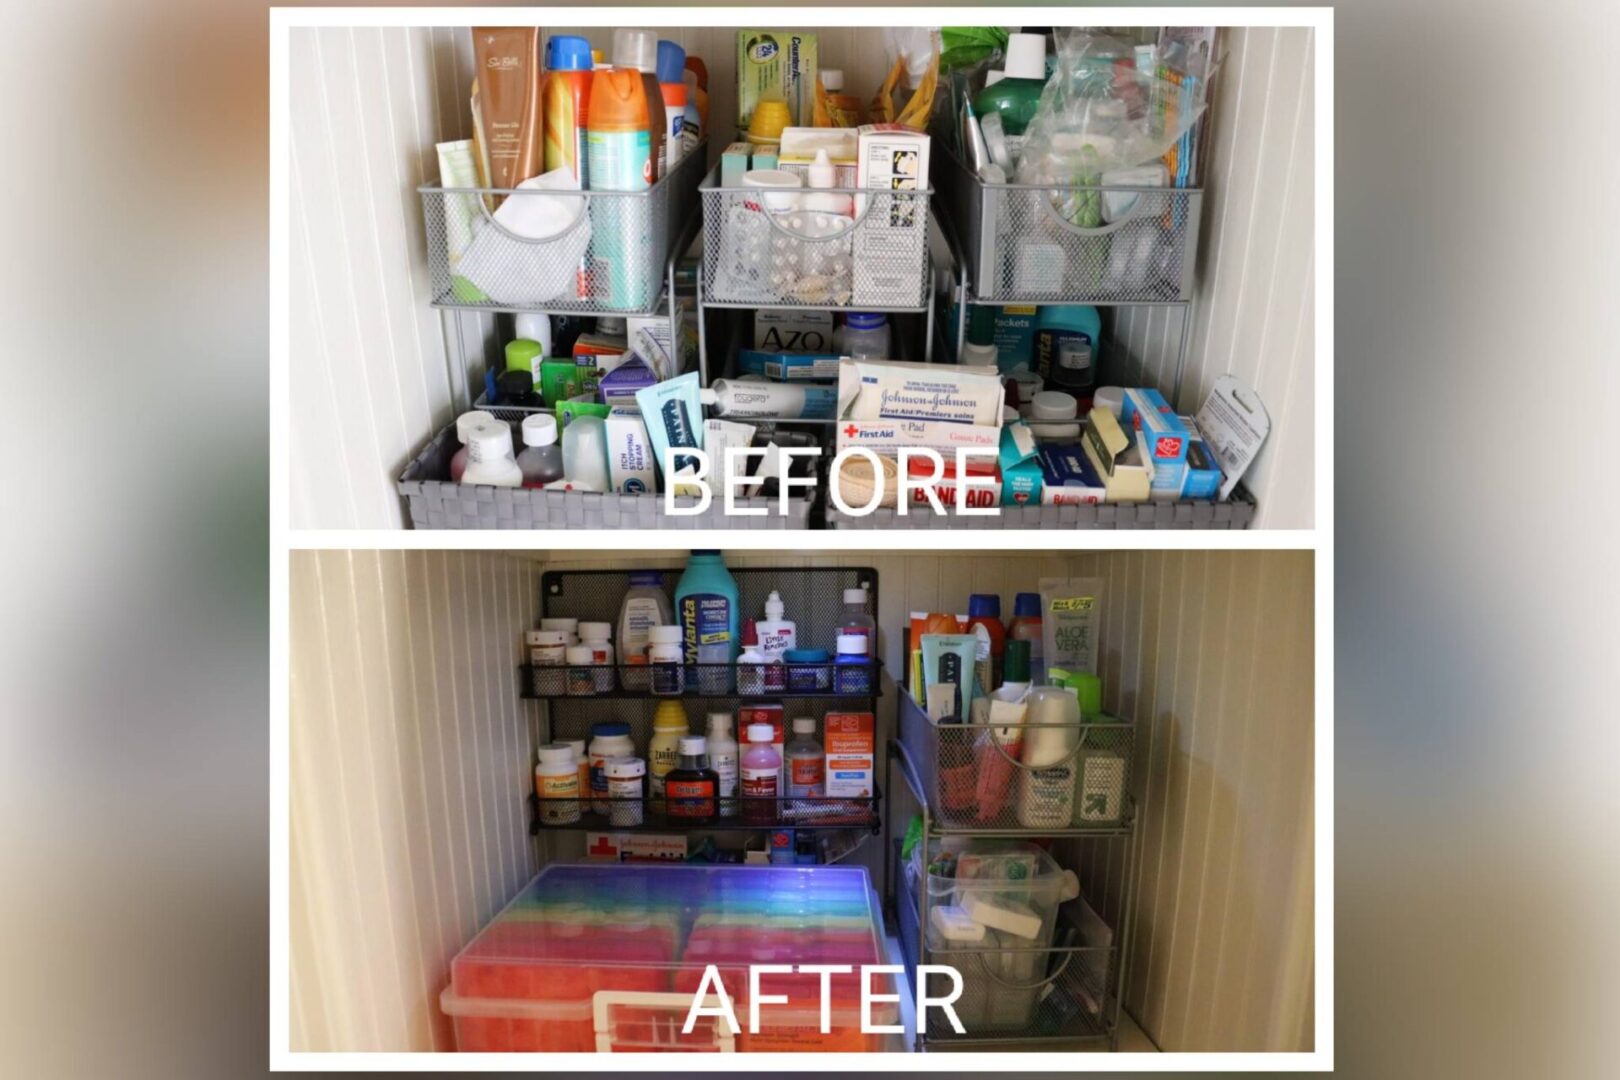 Before and after picture of the organization of miscellaneous household items